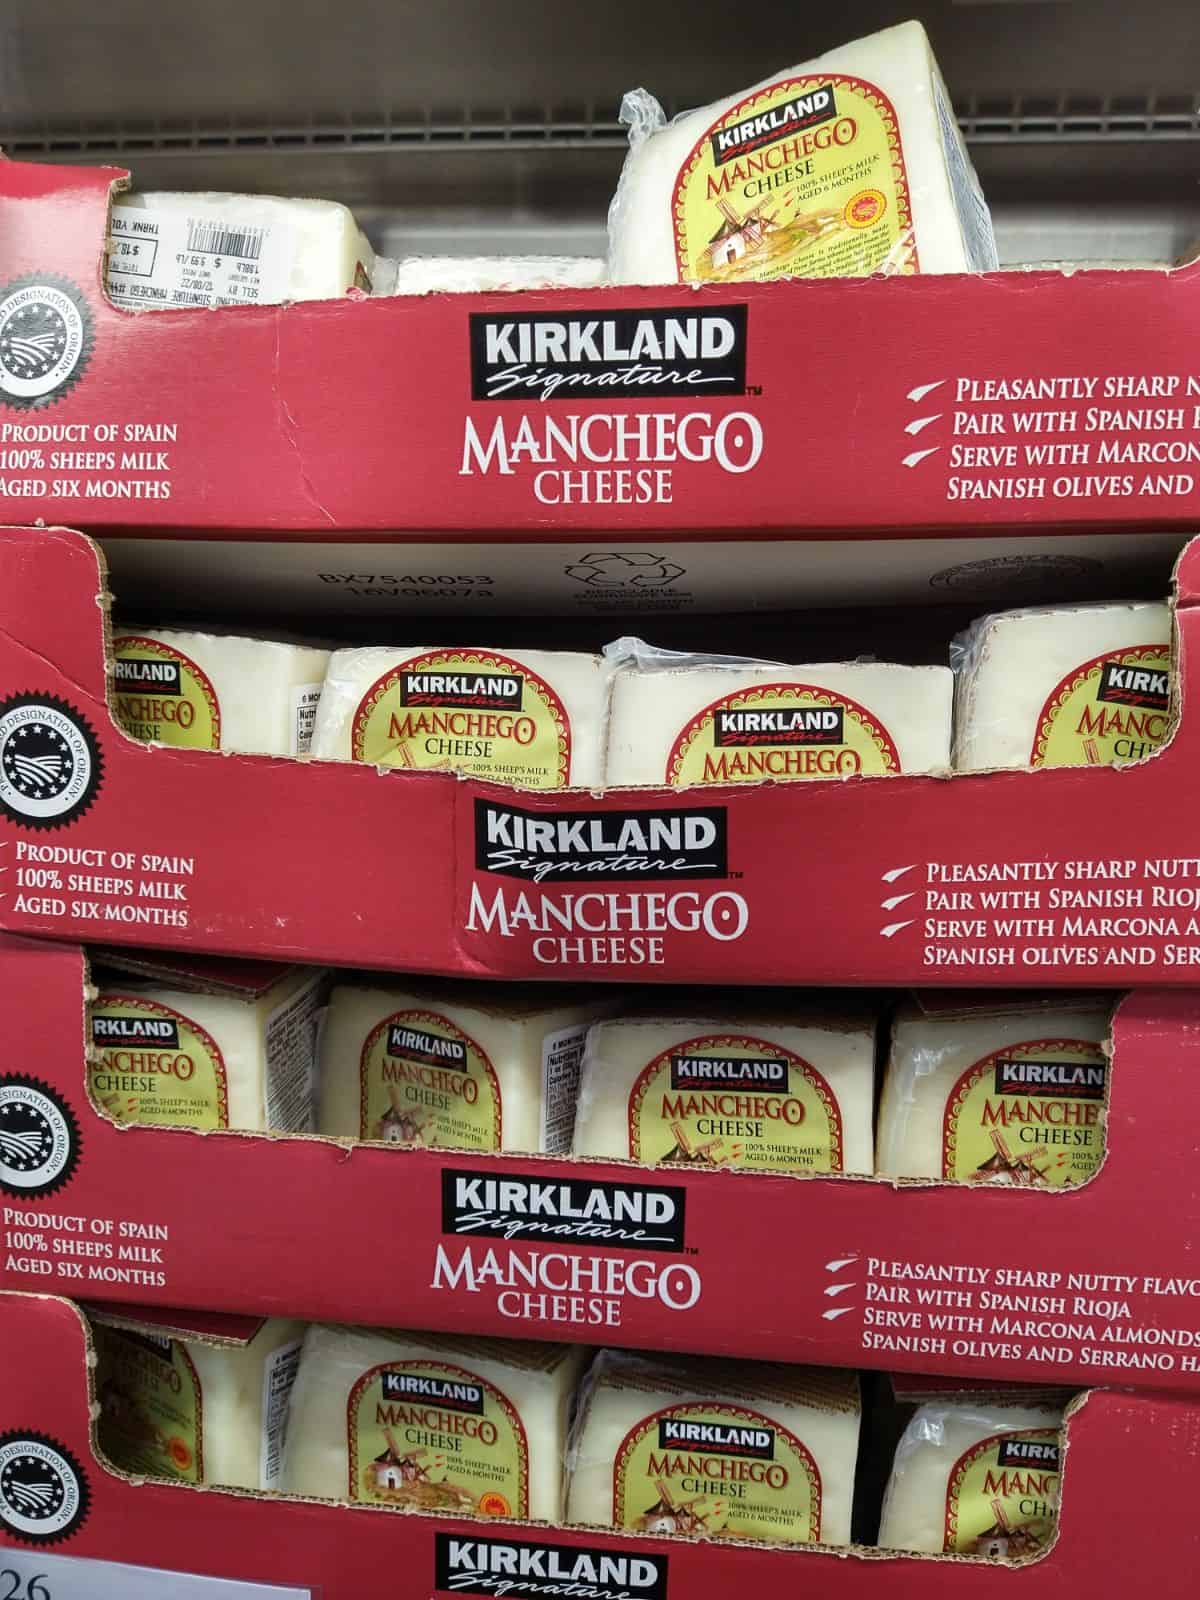 Red boxes filled with chunks of Kirkland Manchego cheese.